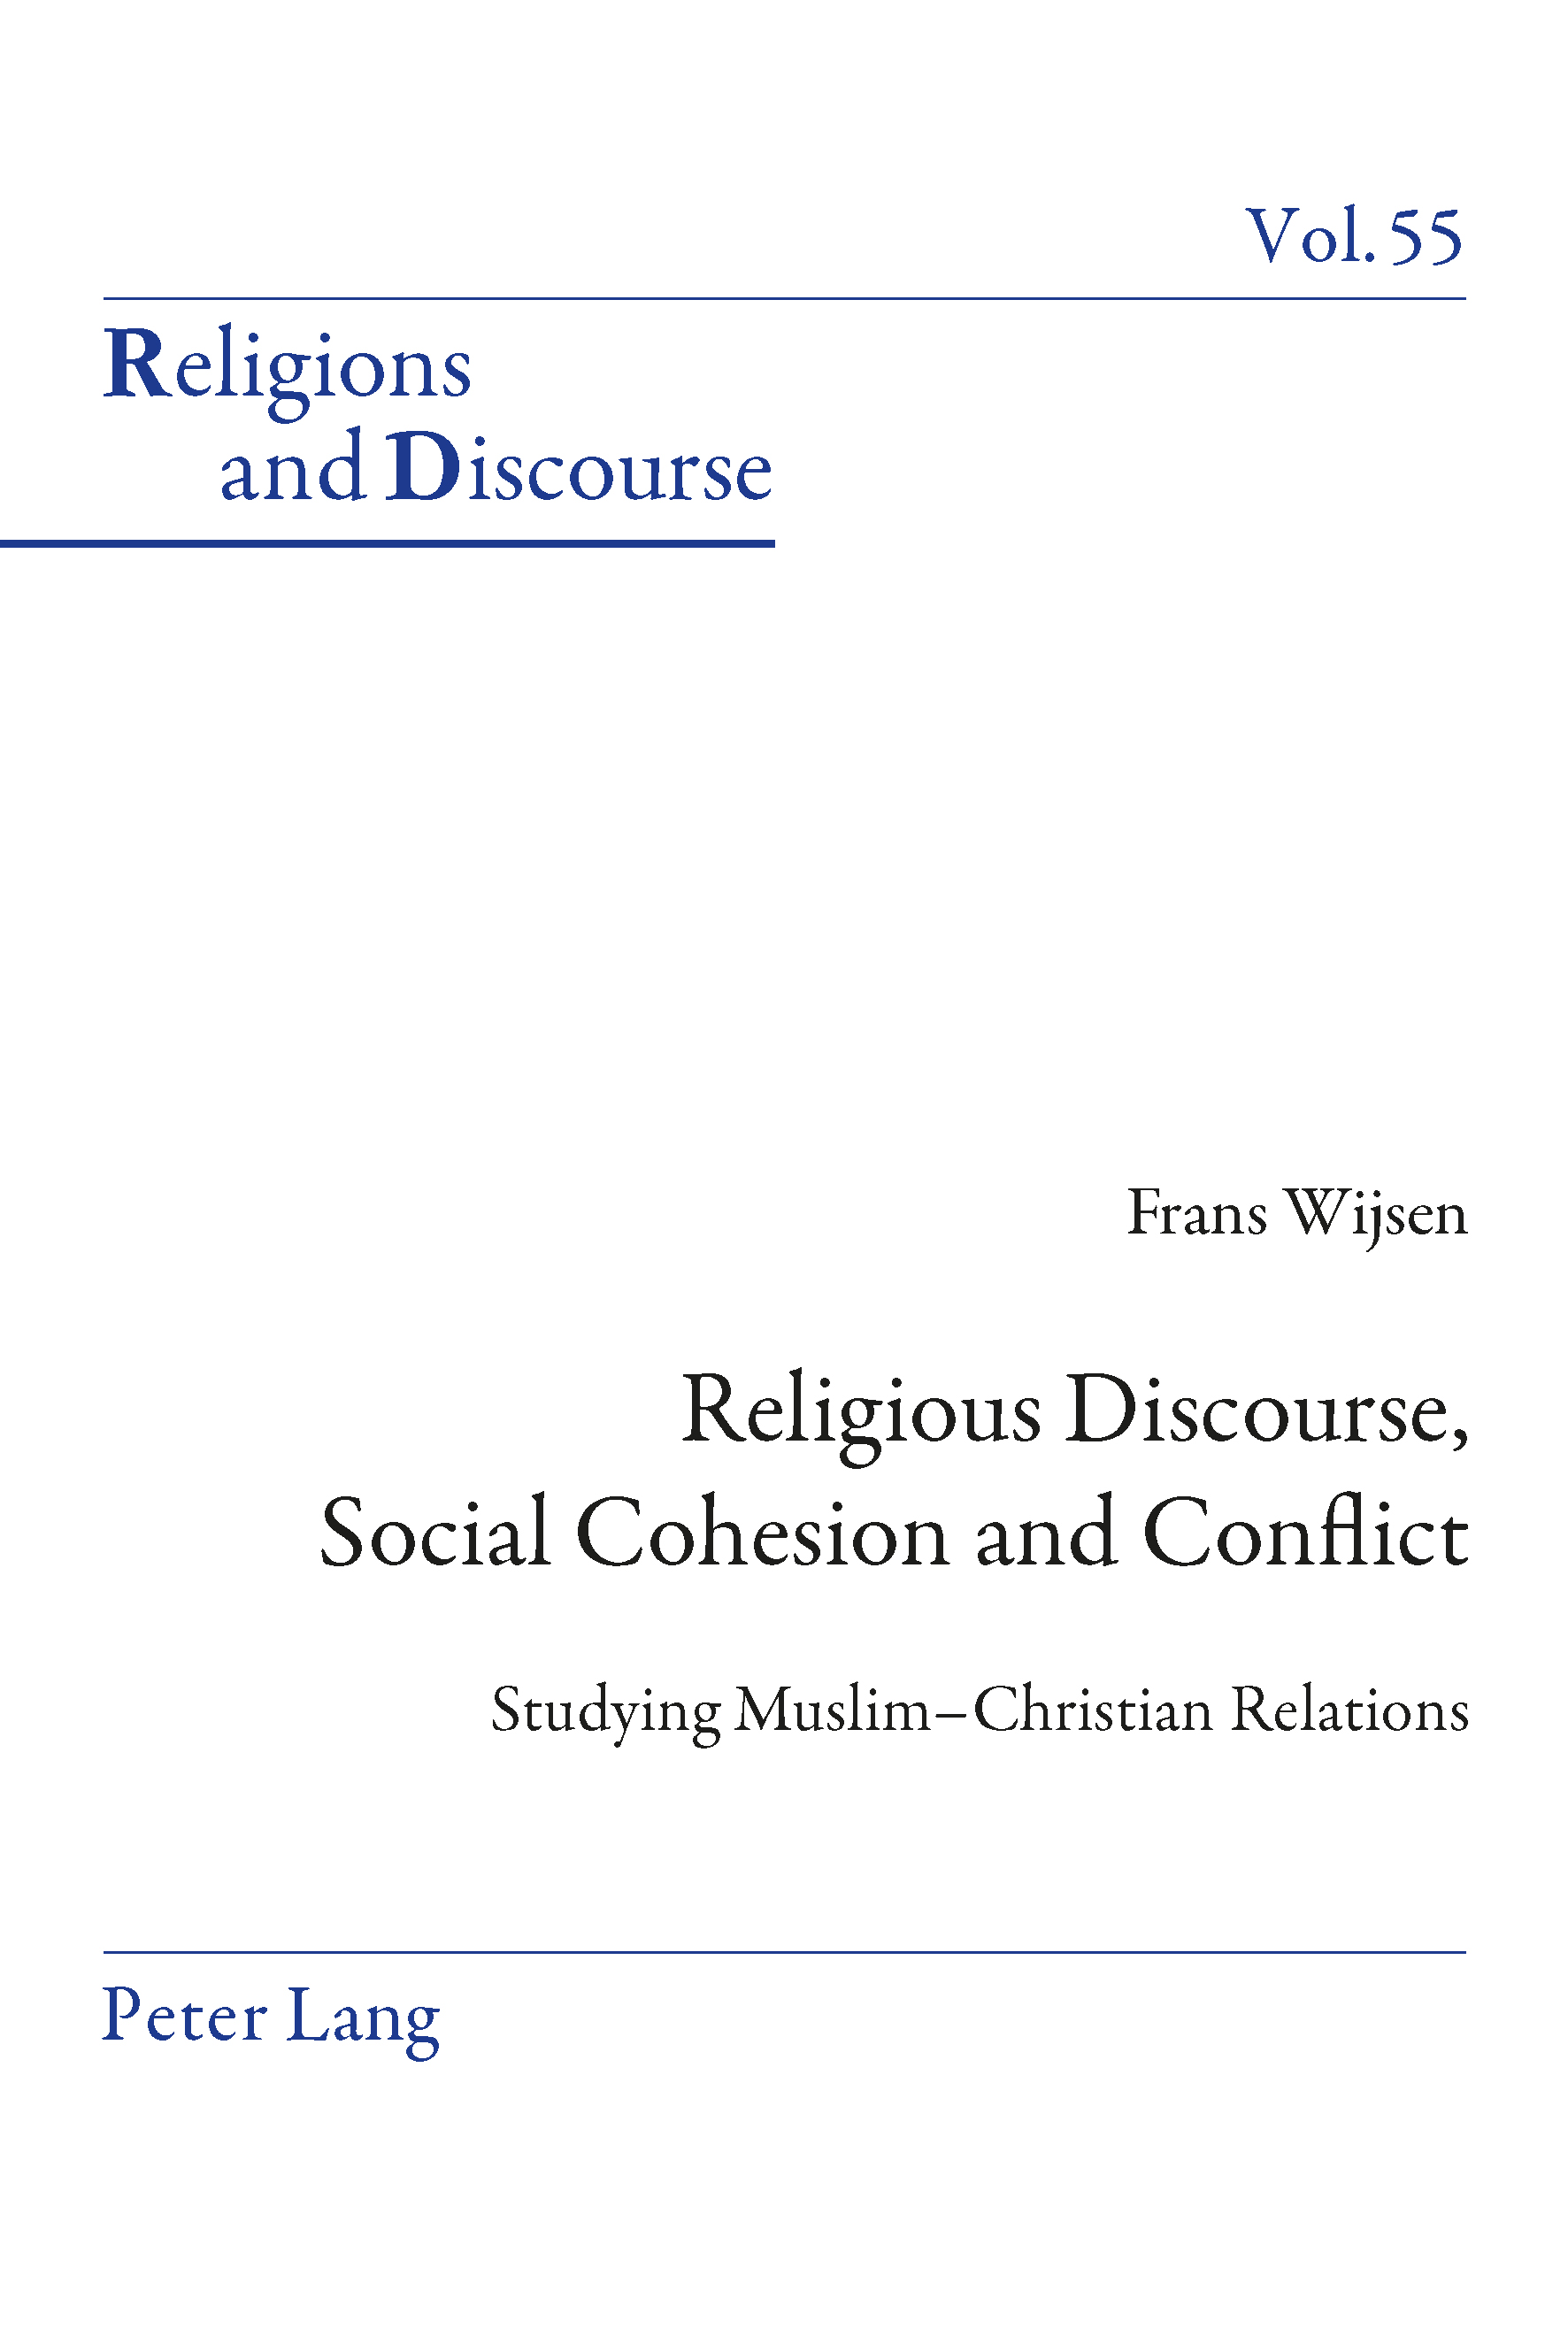 Religious Discourse, Social Cohesion and Conflict - 50-99.99